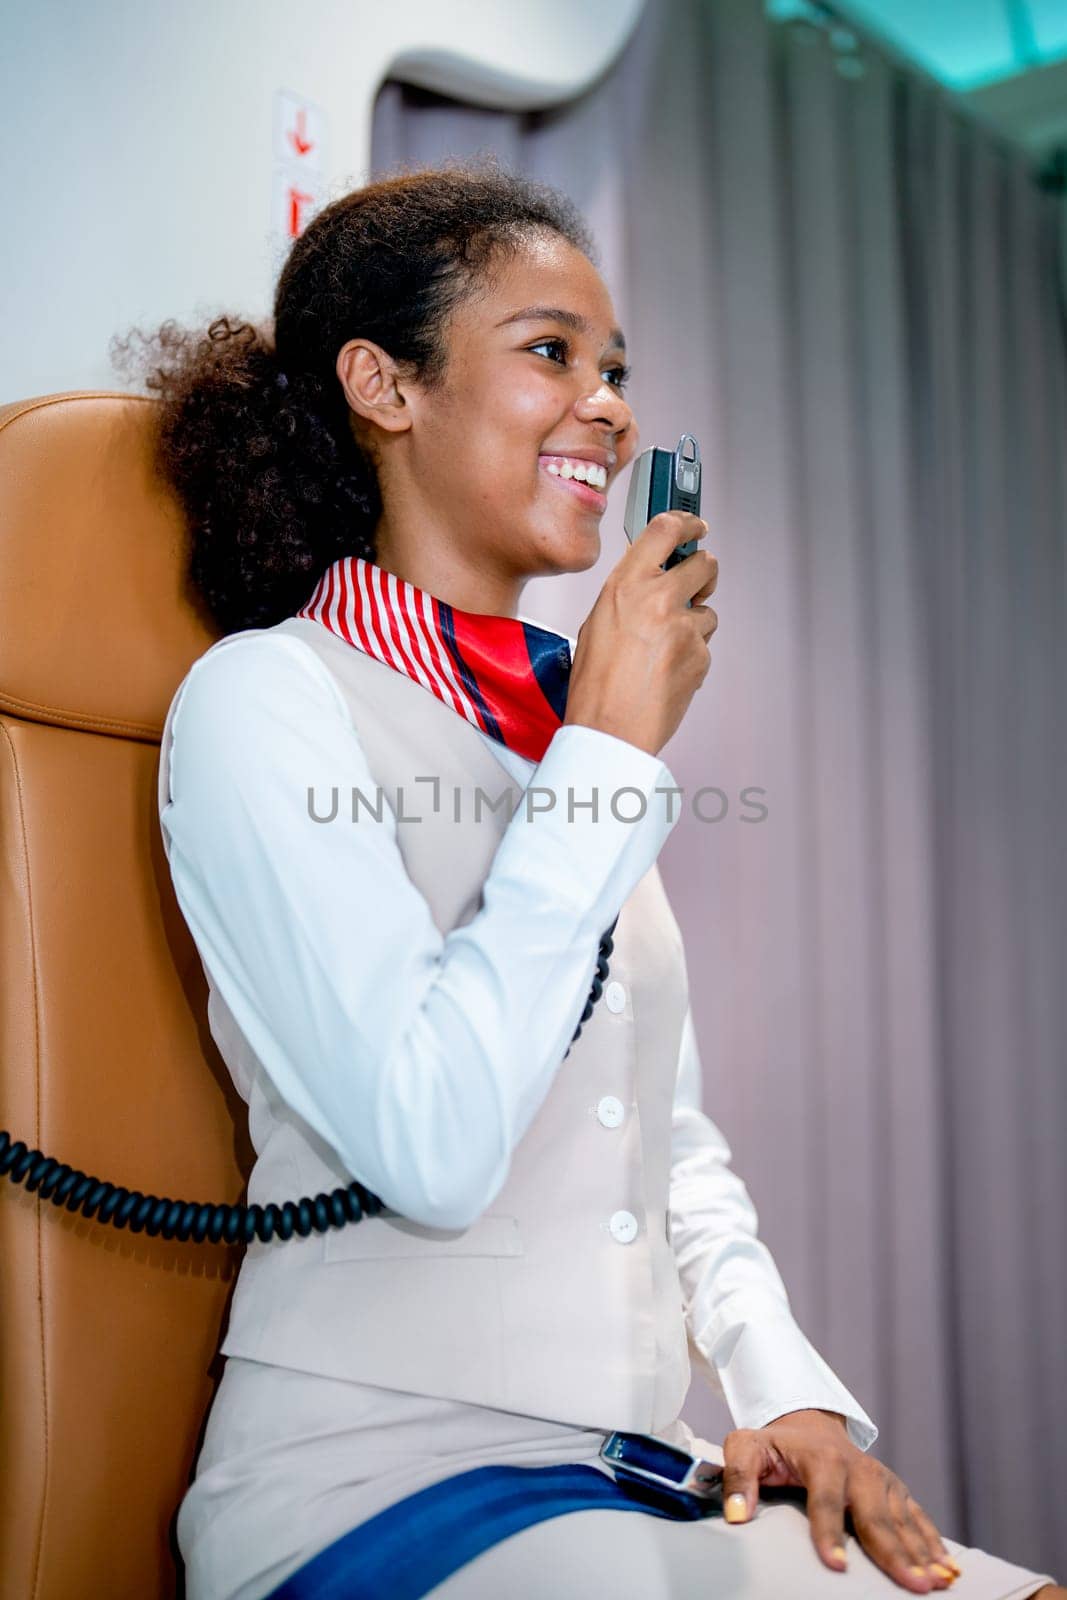 Air hostess or airline staff sit on cabin crew seat and use microphone of airplane to give by nrradmin